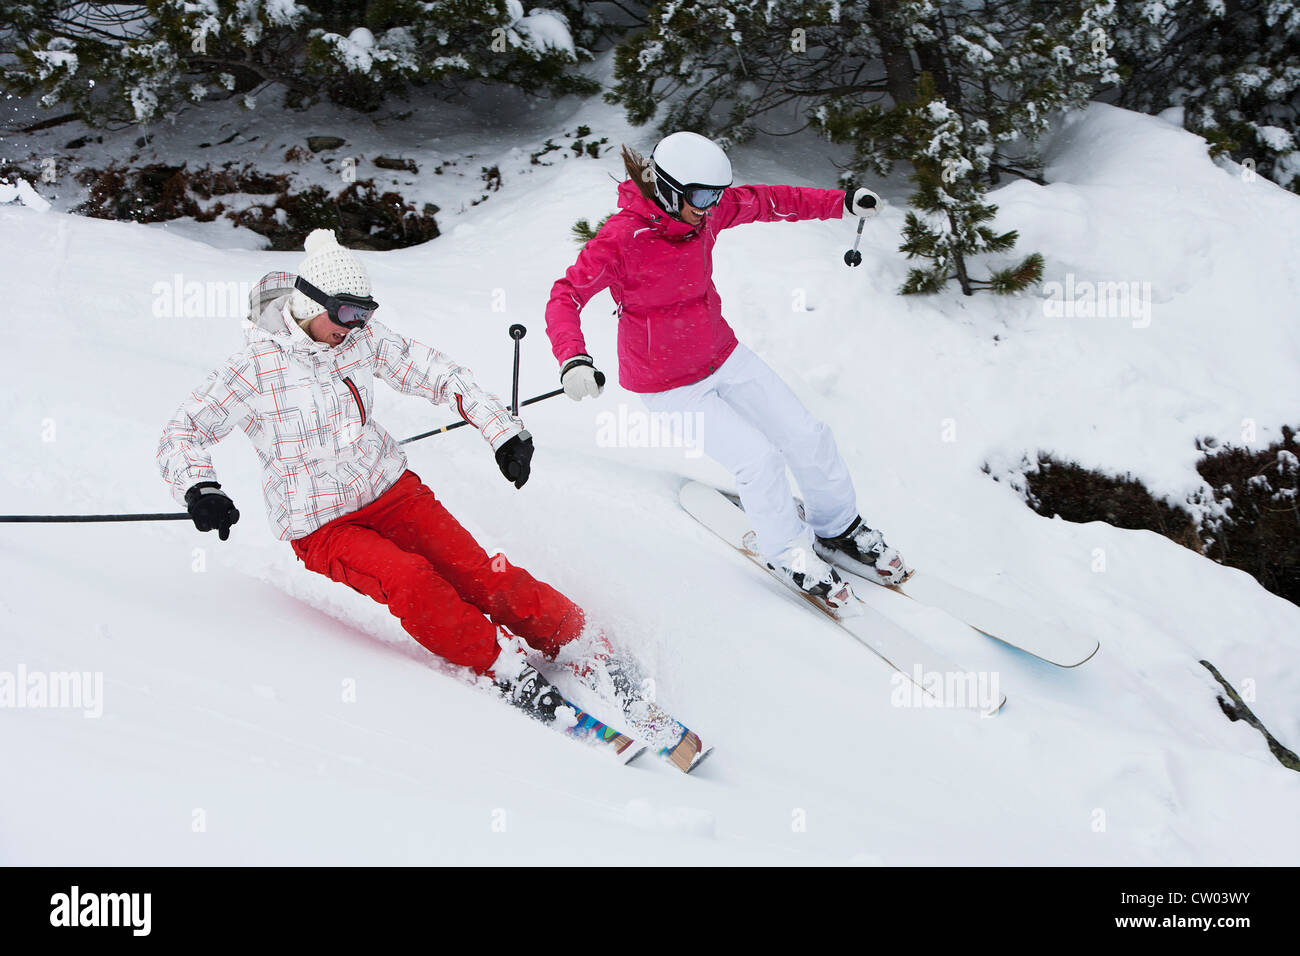 Cabotage skieurs on snowy slope Banque D'Images